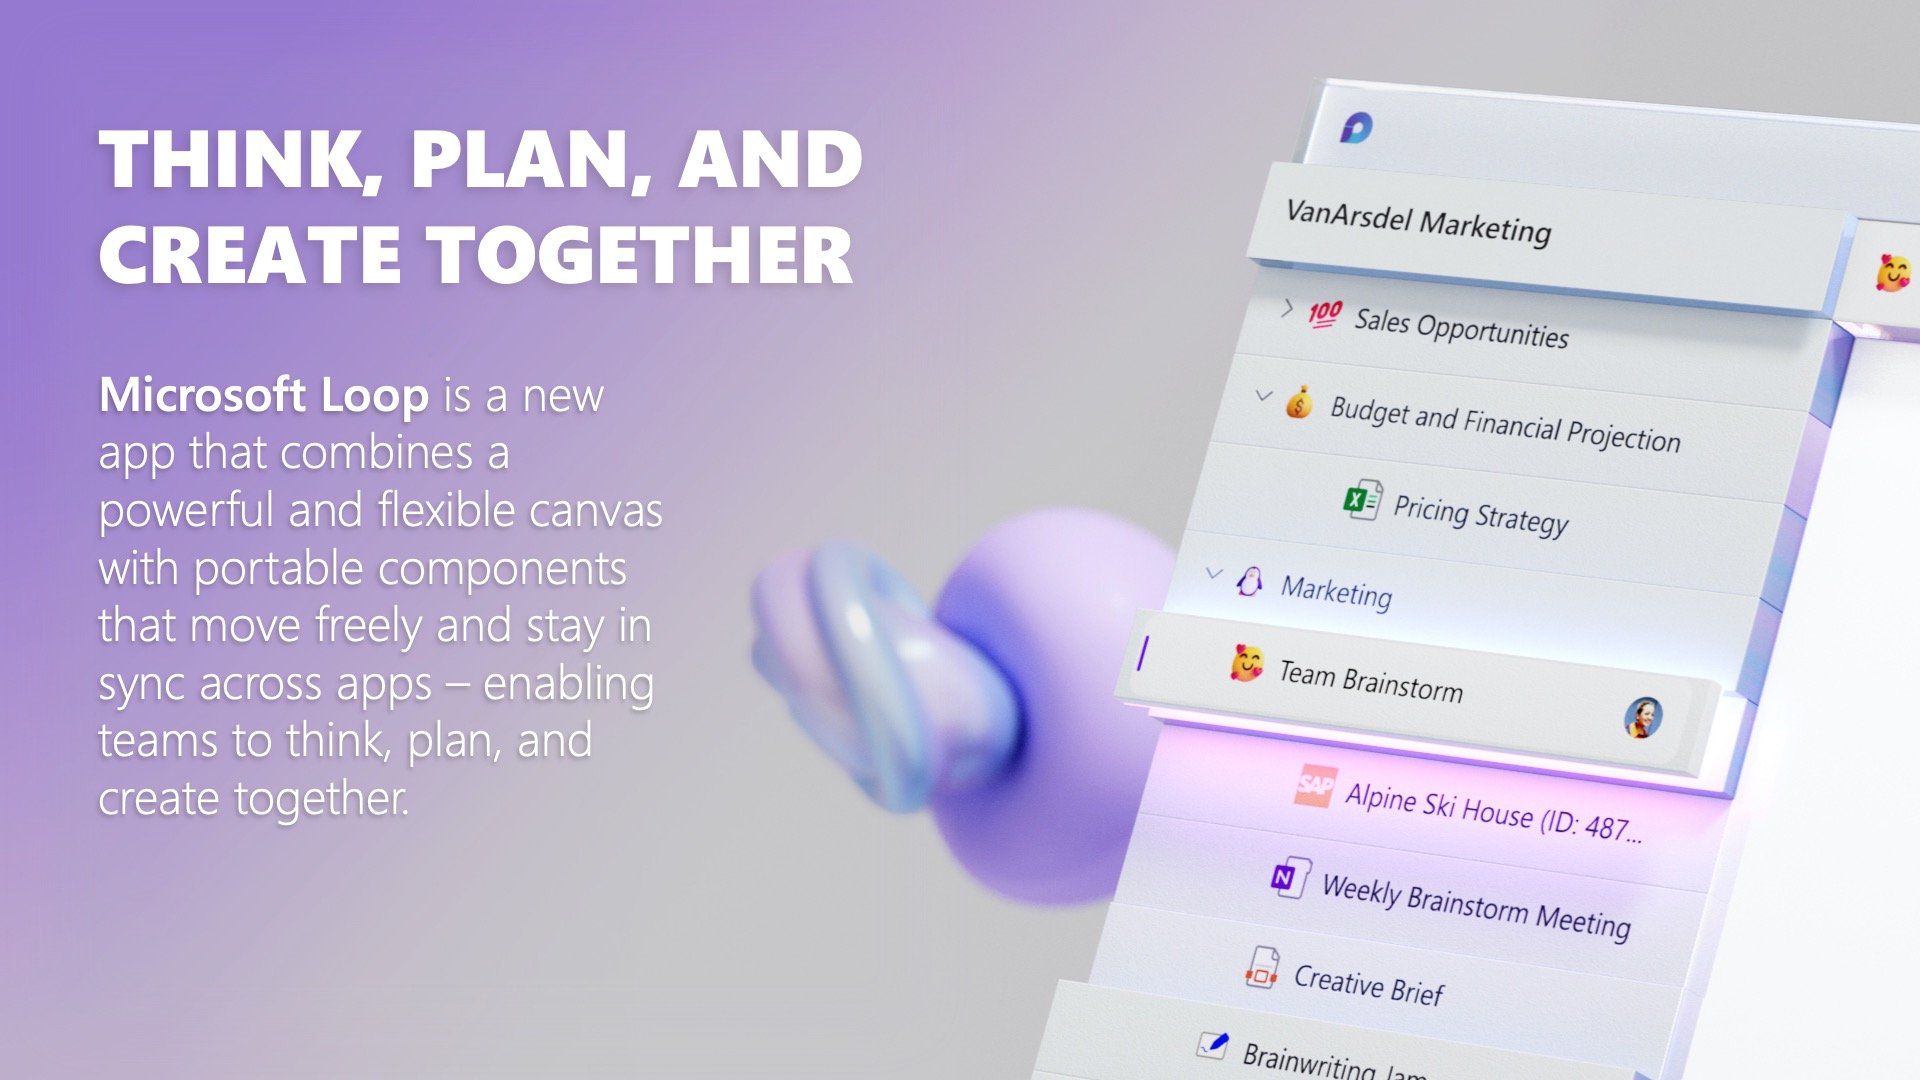 a microsoft loop app that allows you to think plan and create together